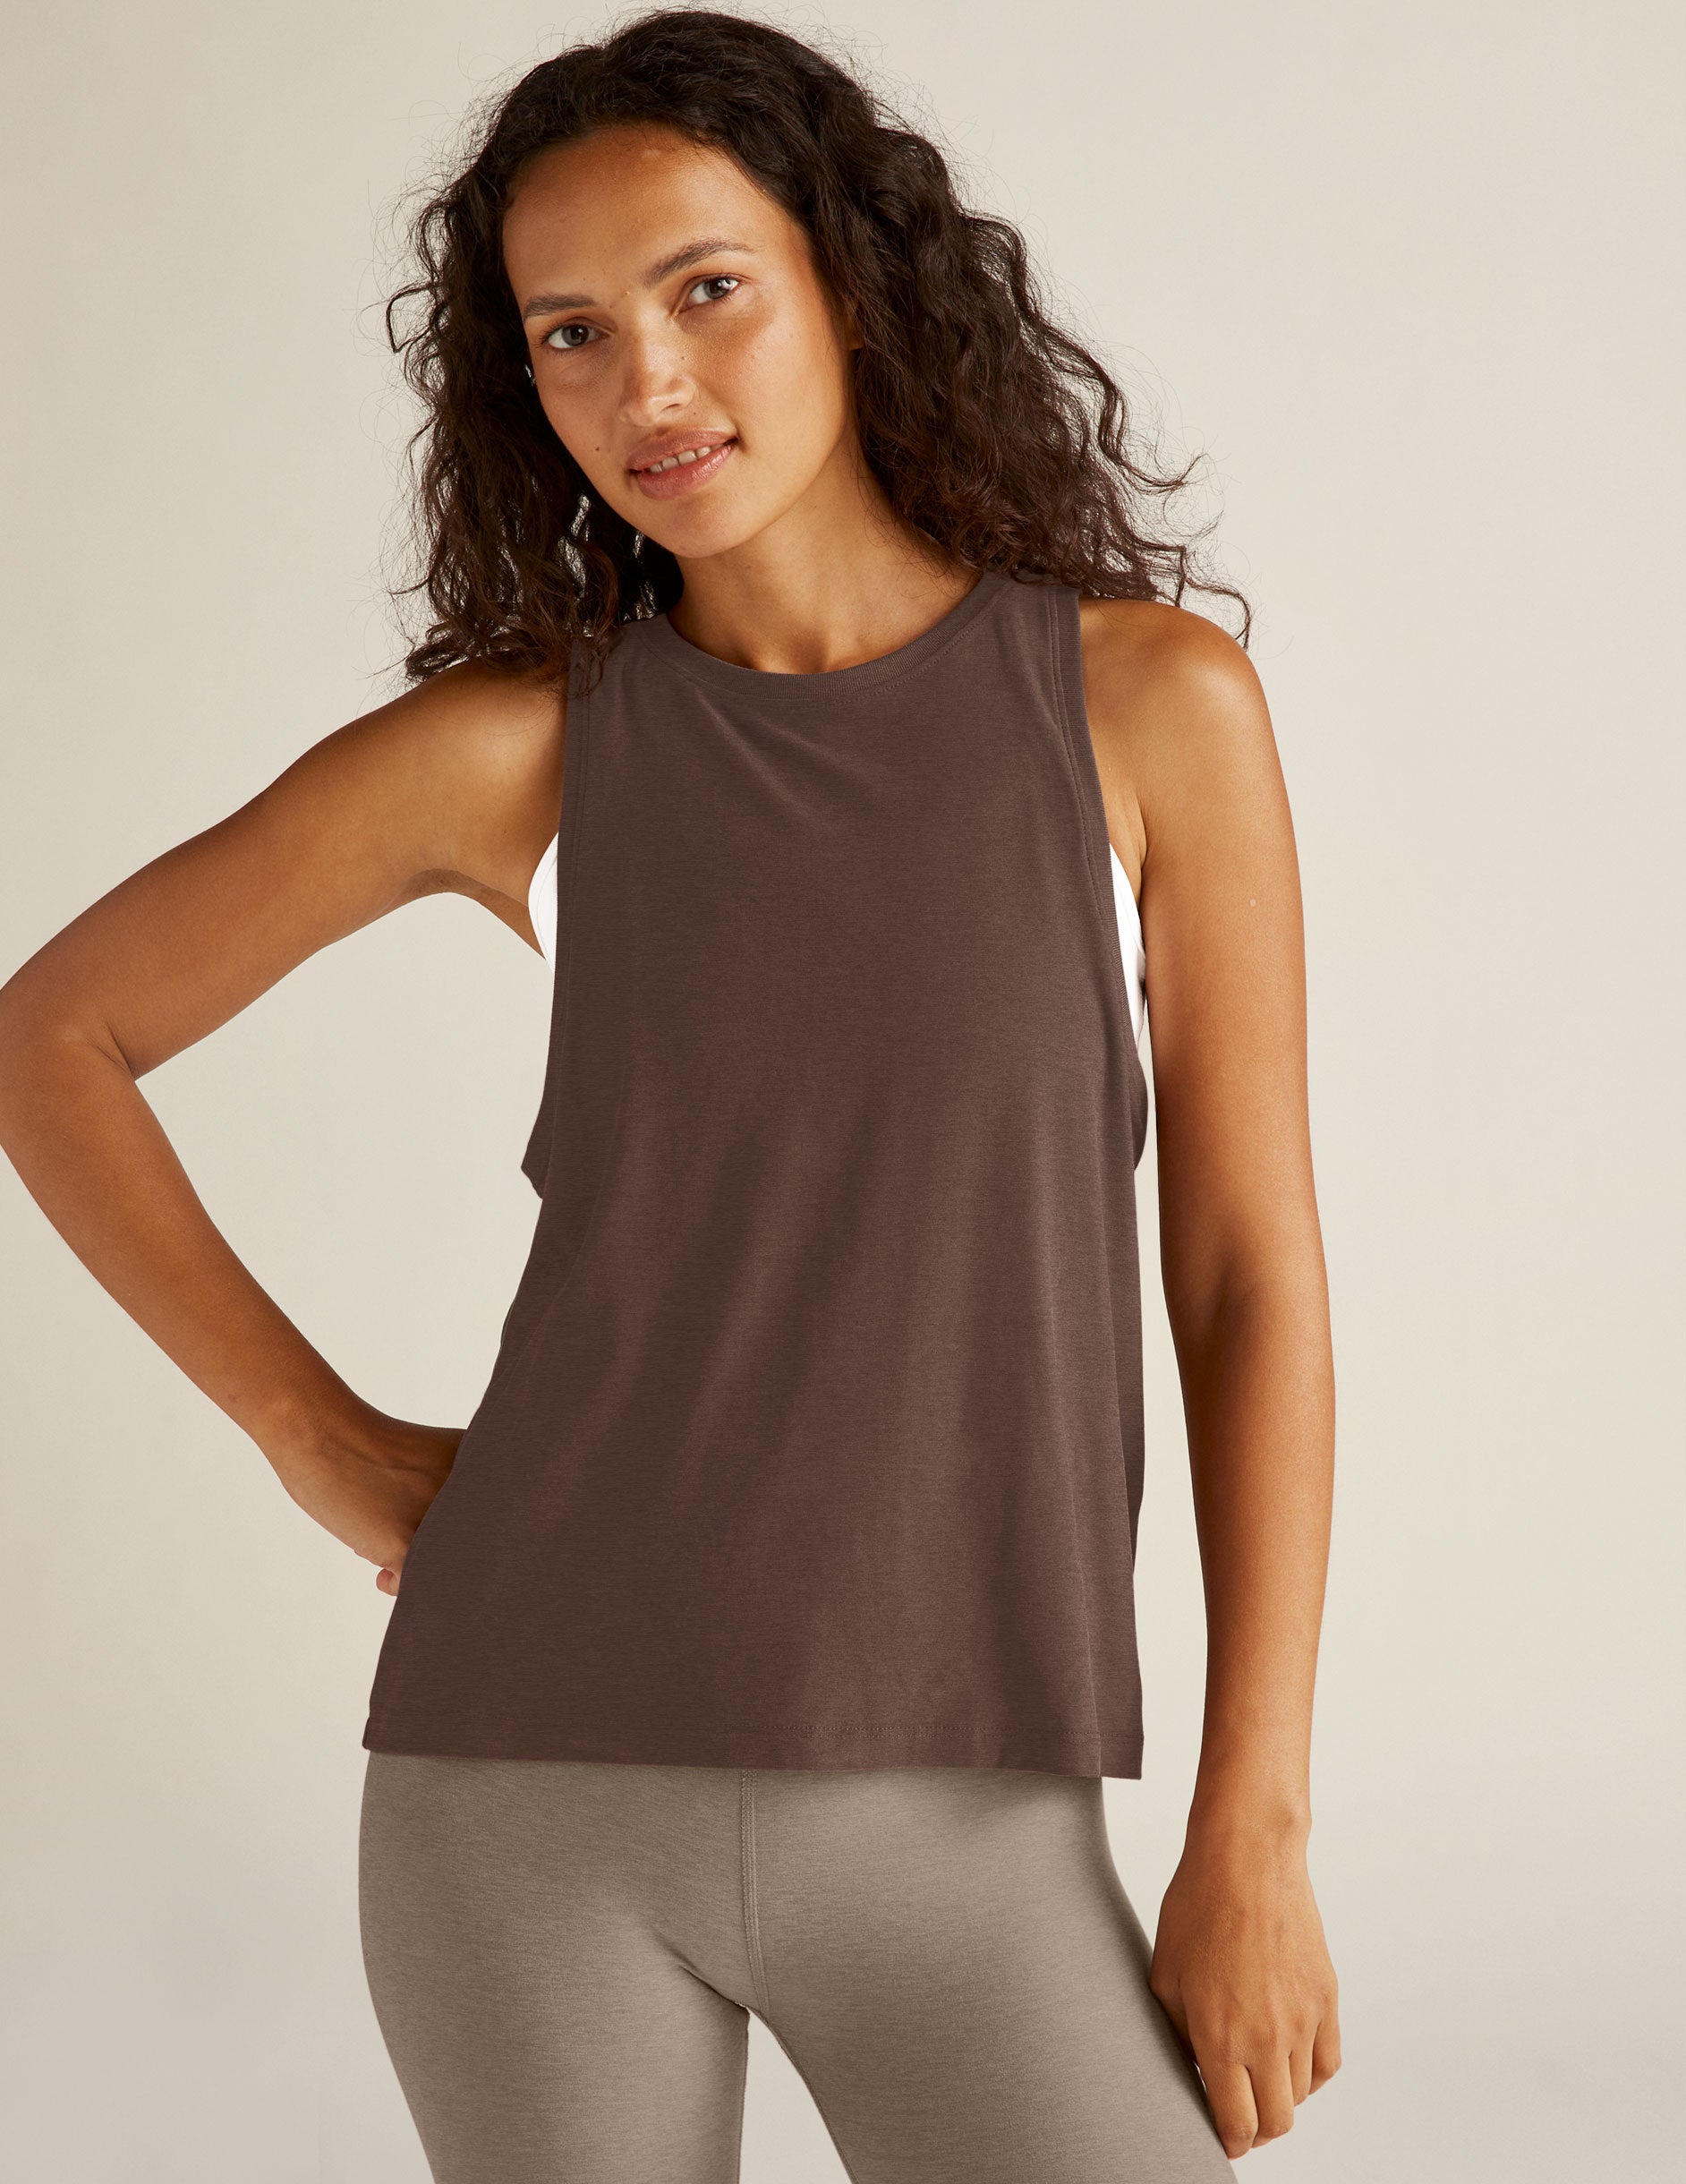 brown loose-fitting high, scooped-neck tank top. 